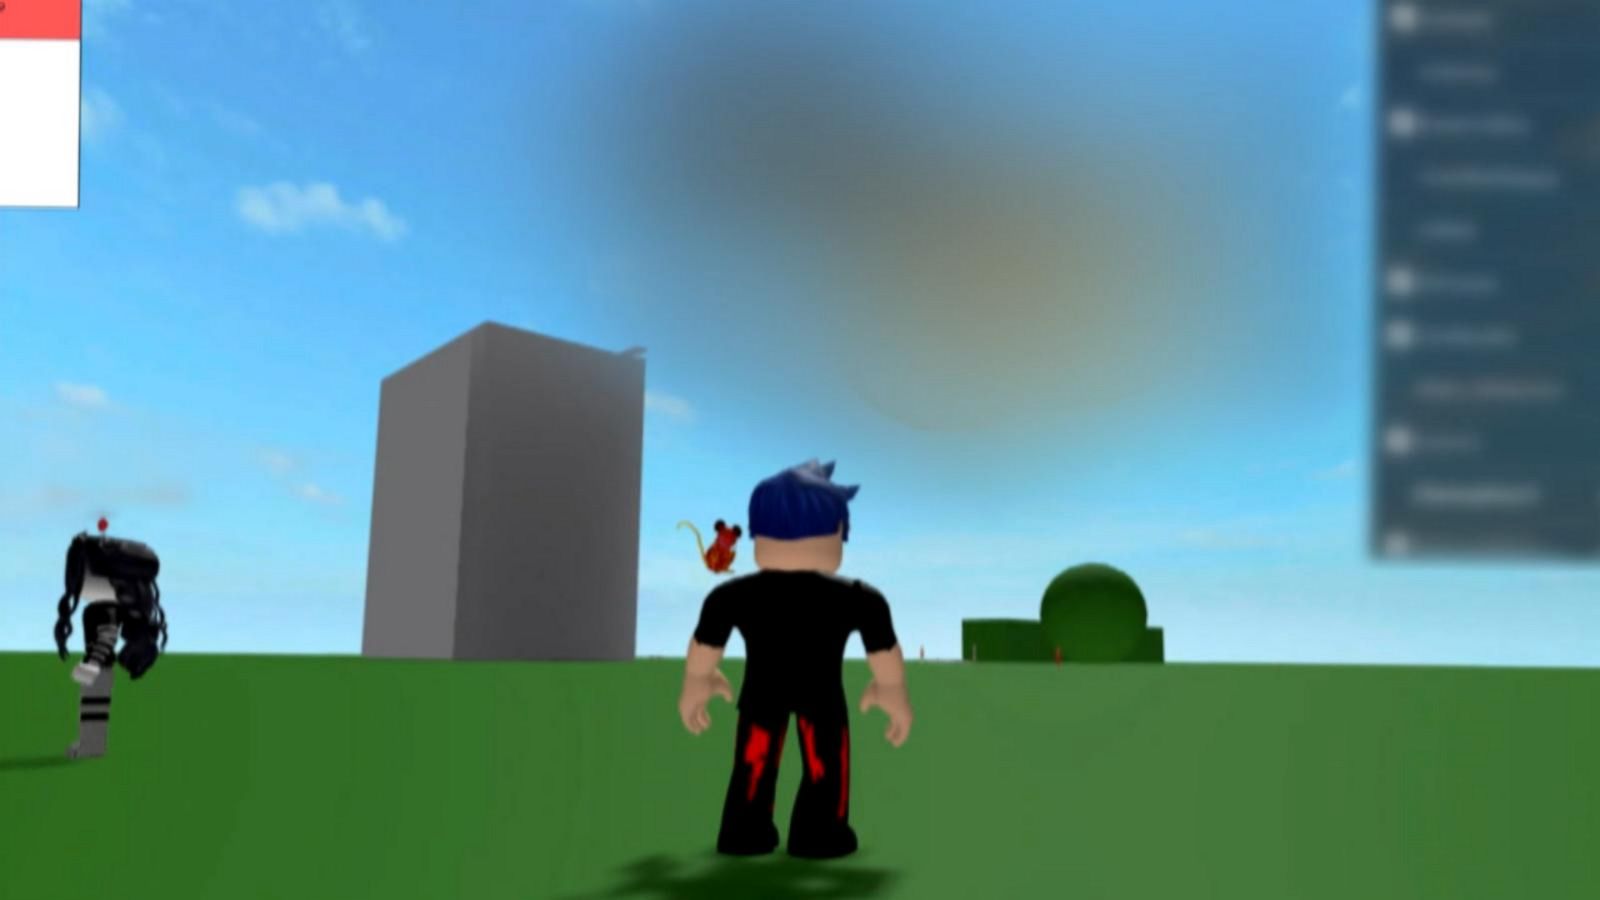 Is it true that if you play Roblox on March 18th, you'll get